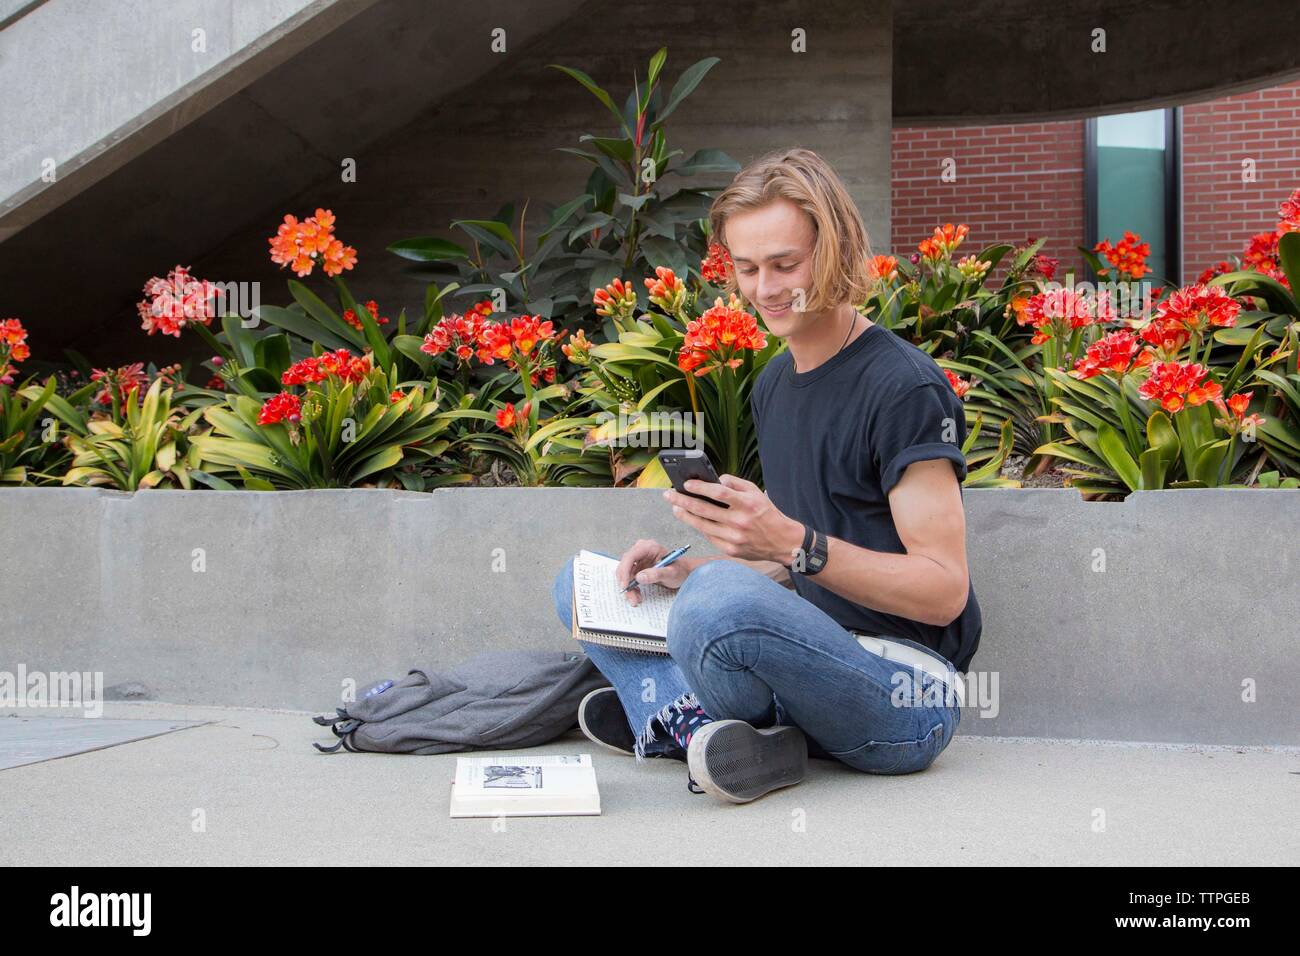 Male student sitting by flowers with books, smiling at text message Stock Photo